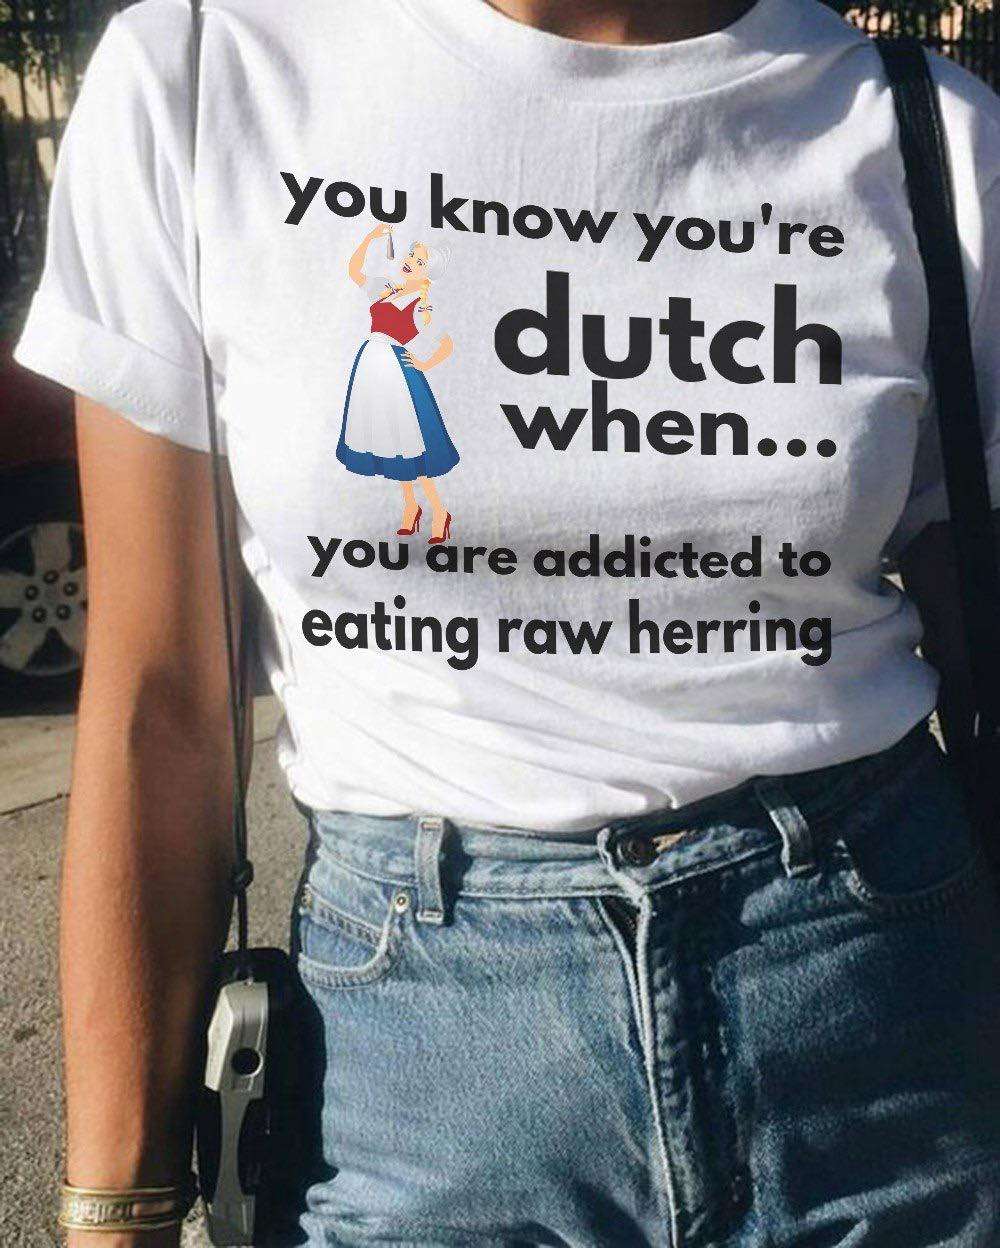 You know you're Dutch when you are addicted to eating raw herring - Ducth woman